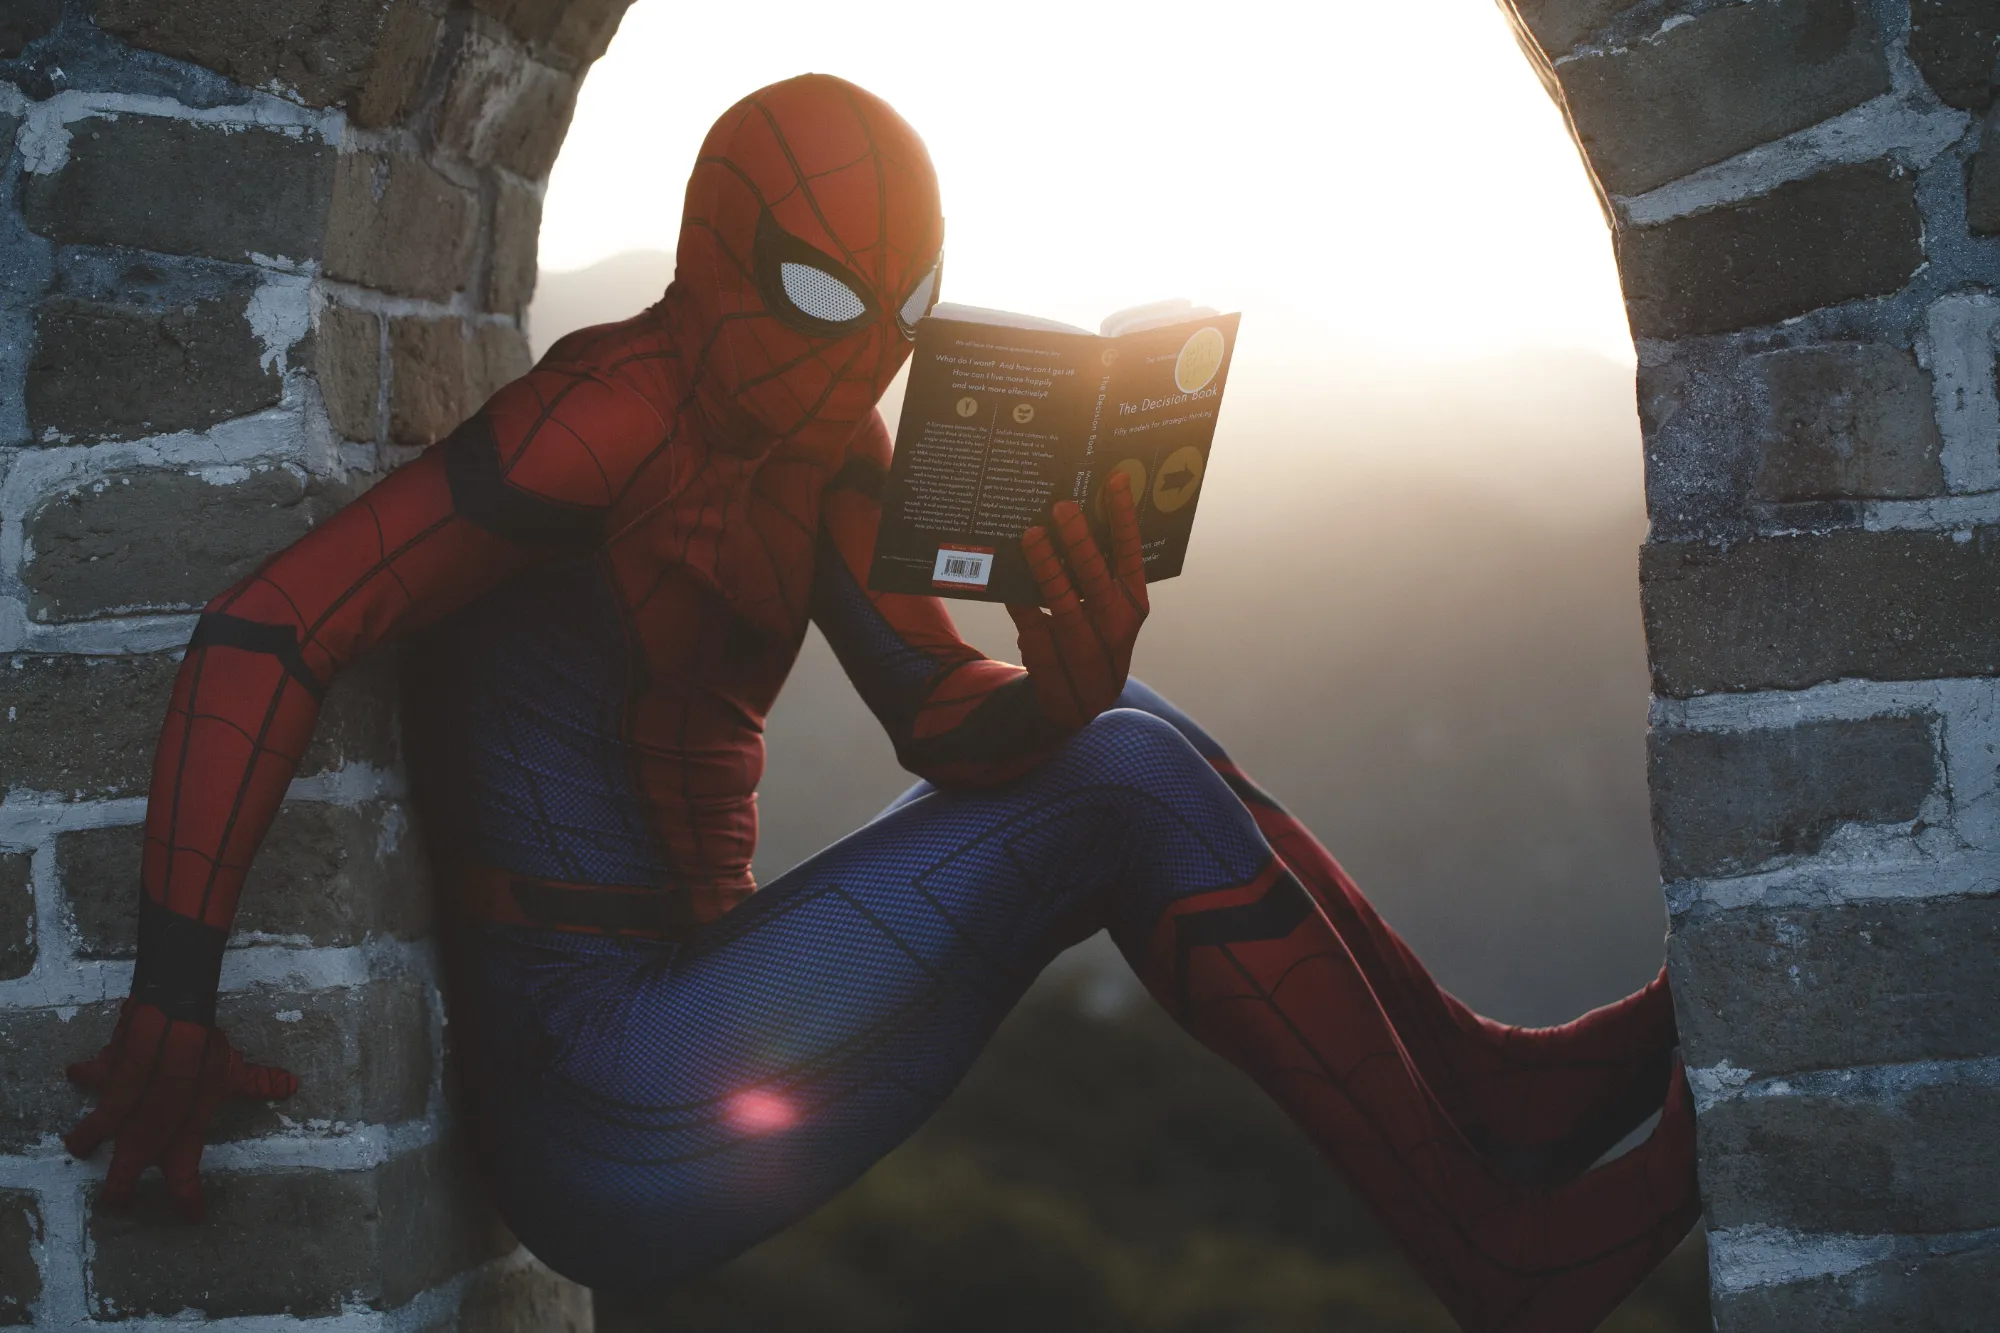 Photo of Spiderman reading a book. Photo by “Road Trip with Raj” from Unsplash.